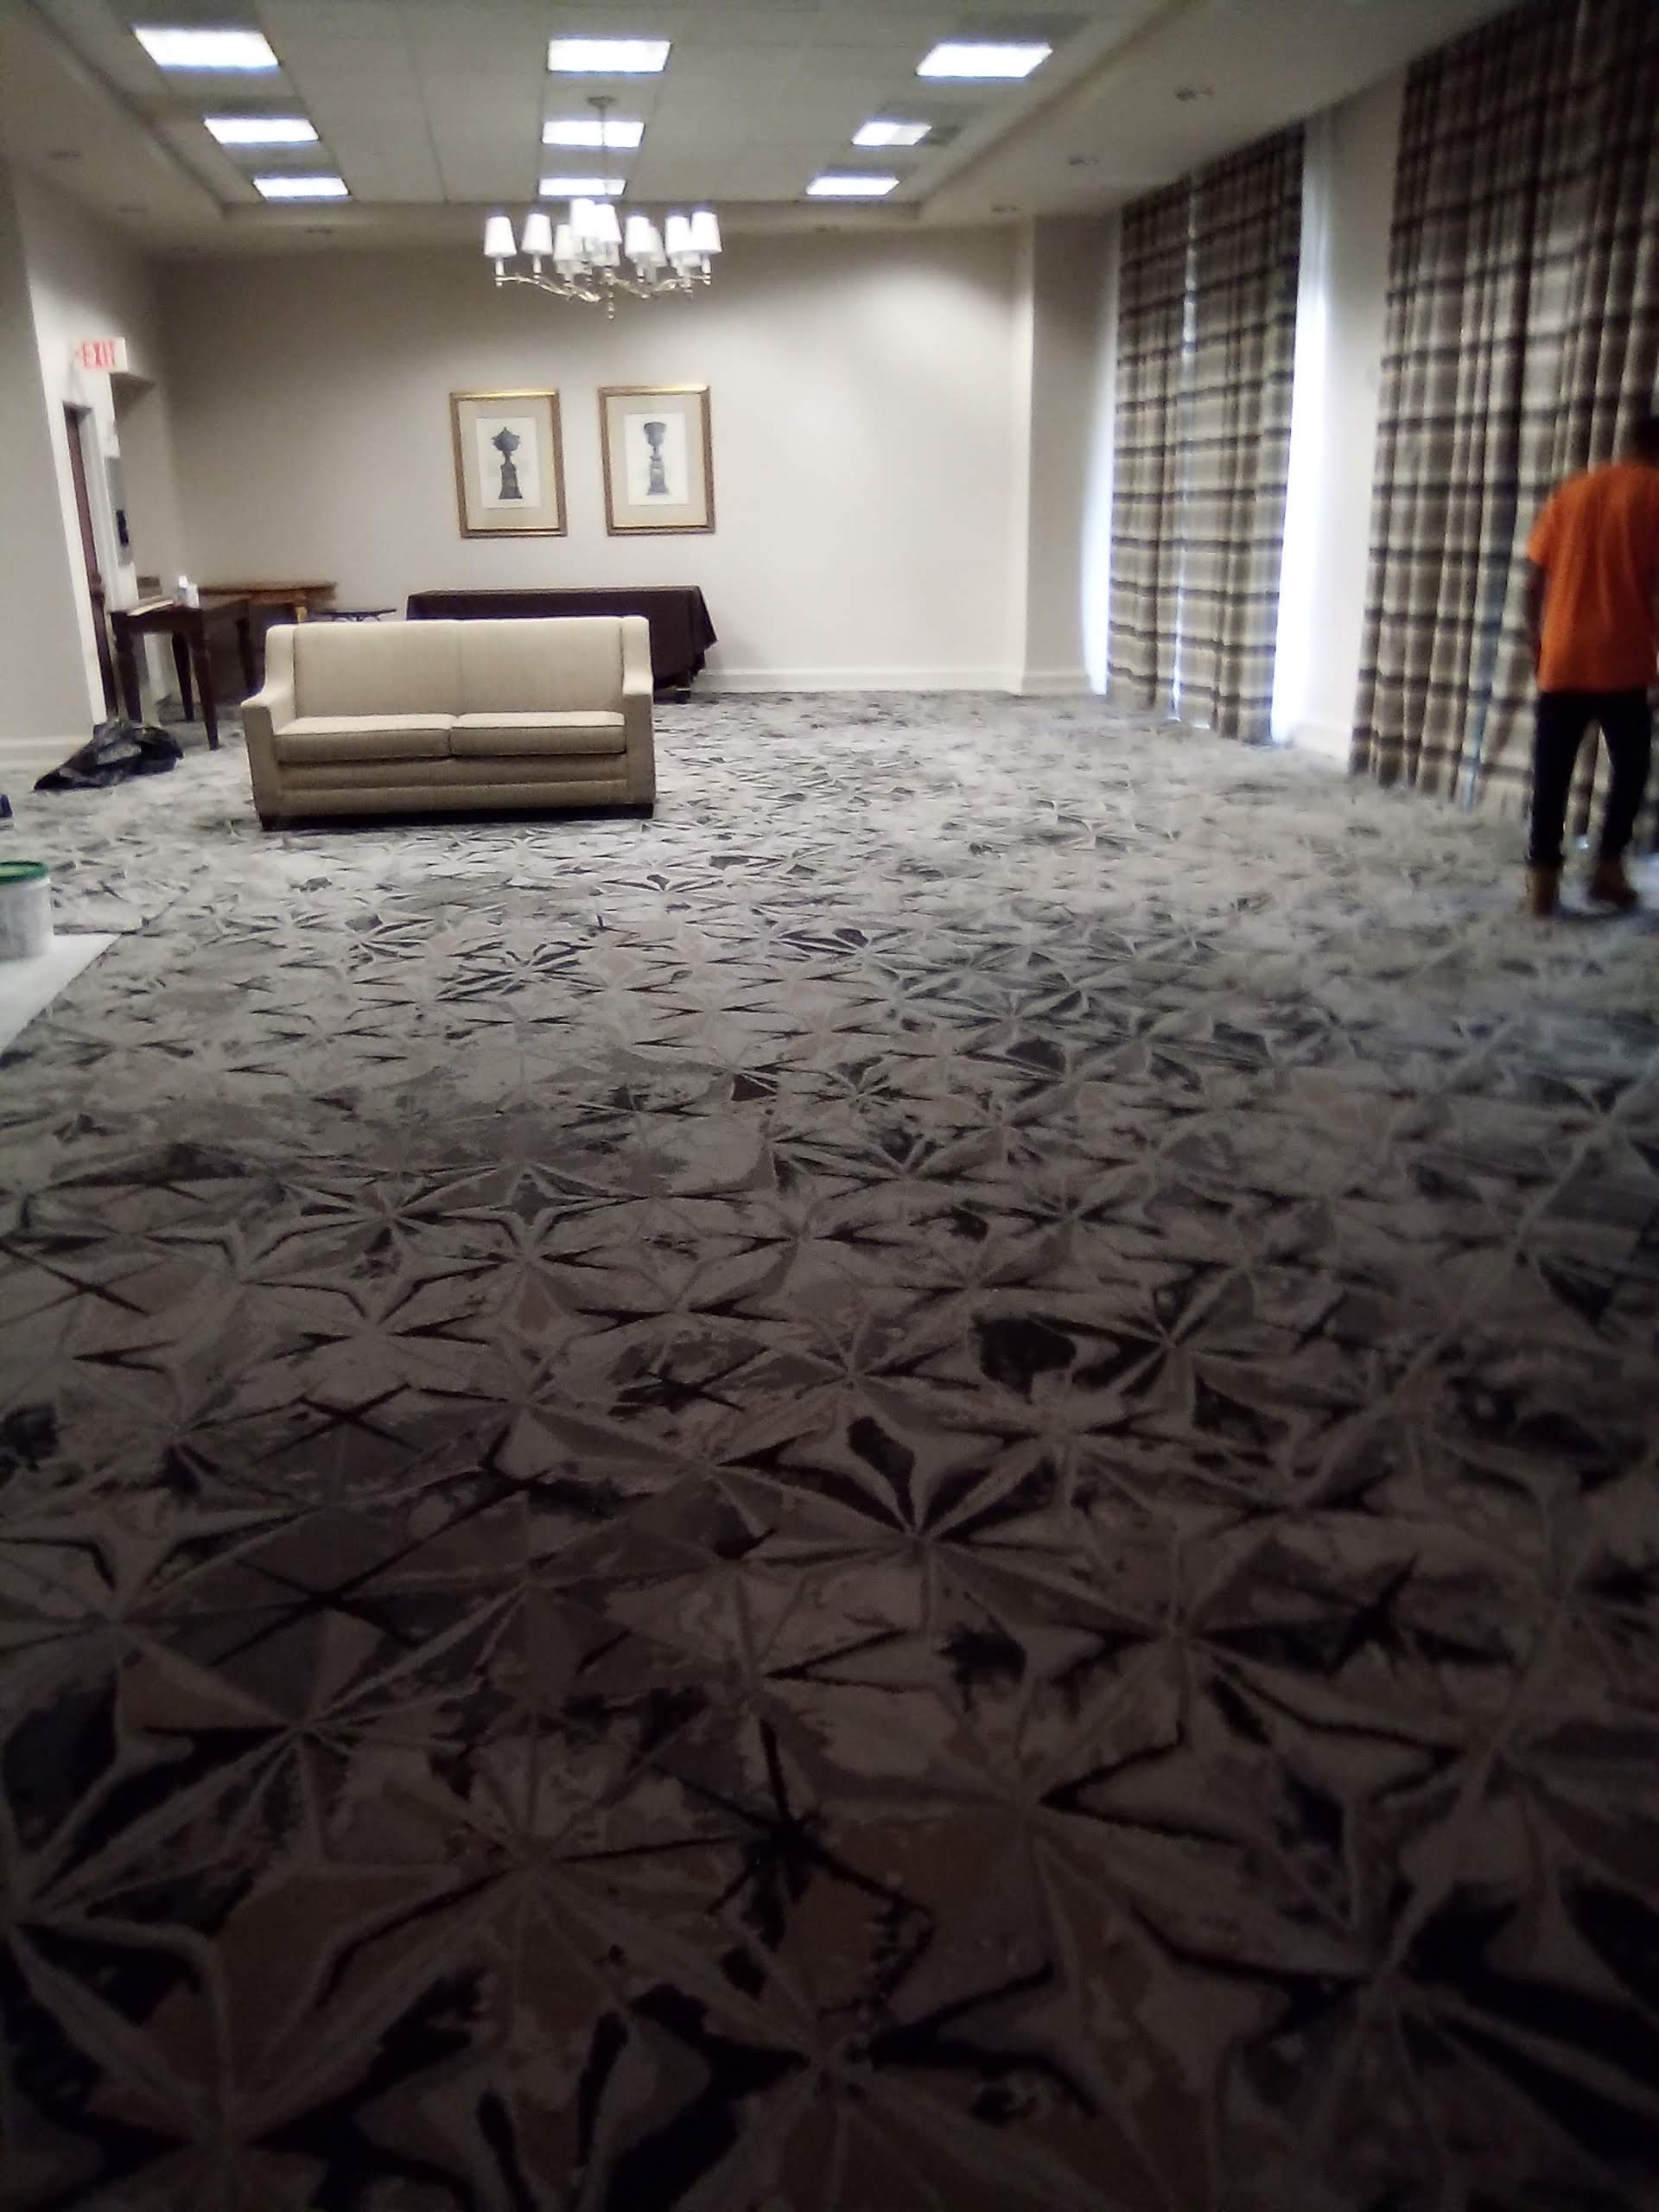 The Omni Hotel,  meeting room. Carpet install by ets flooring service